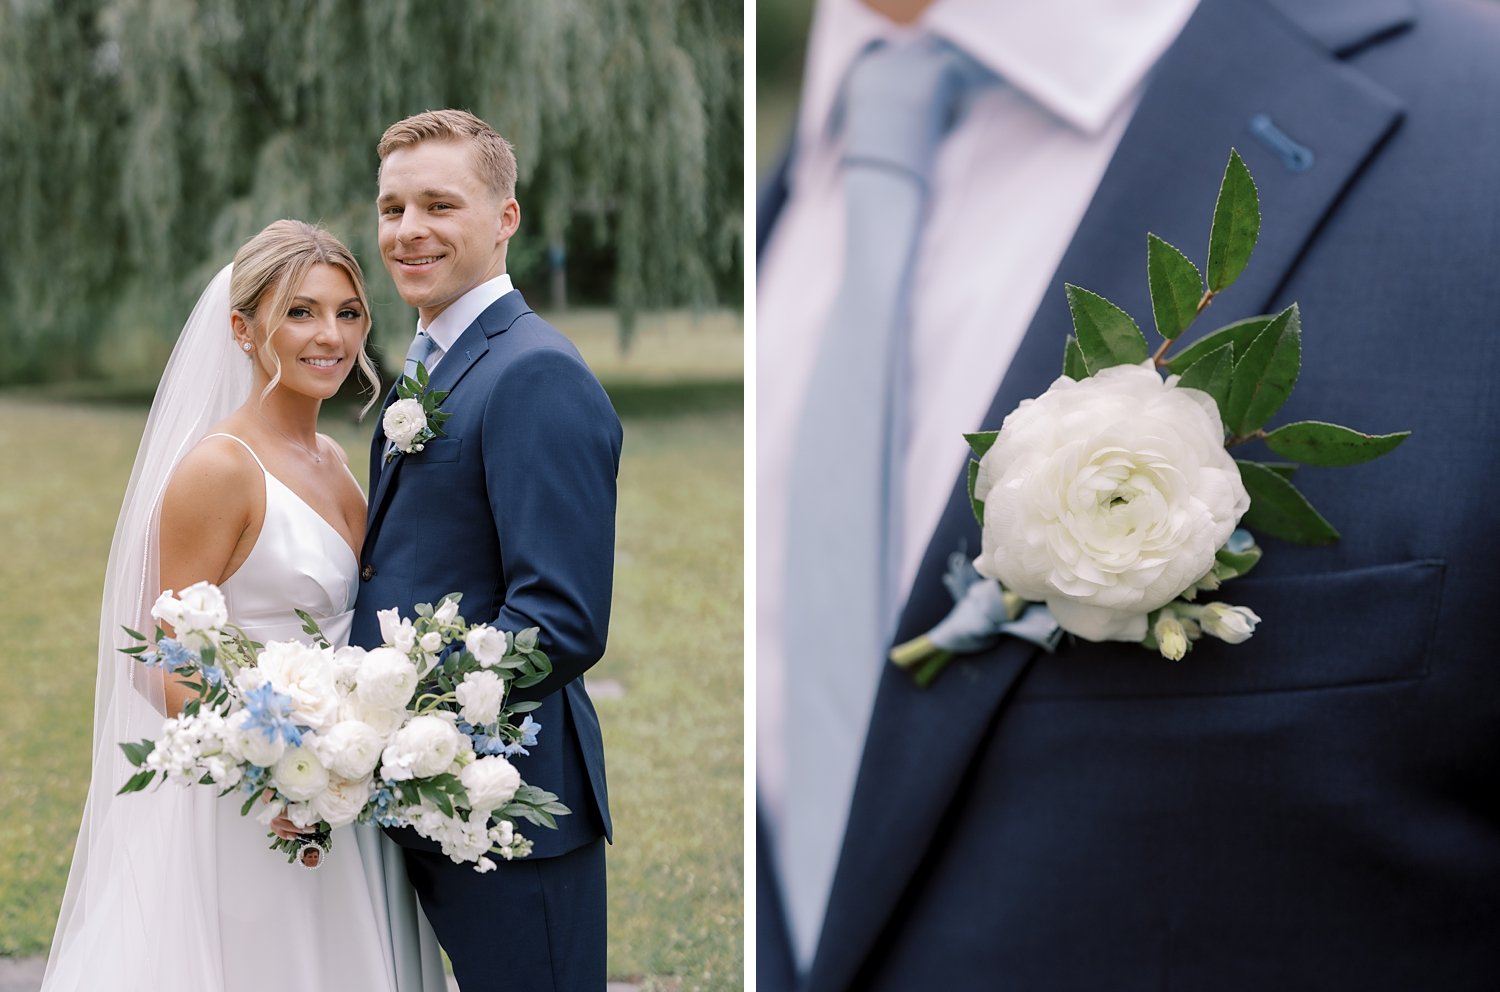 newlyweds hug and groom's boutonnière with white flowers 